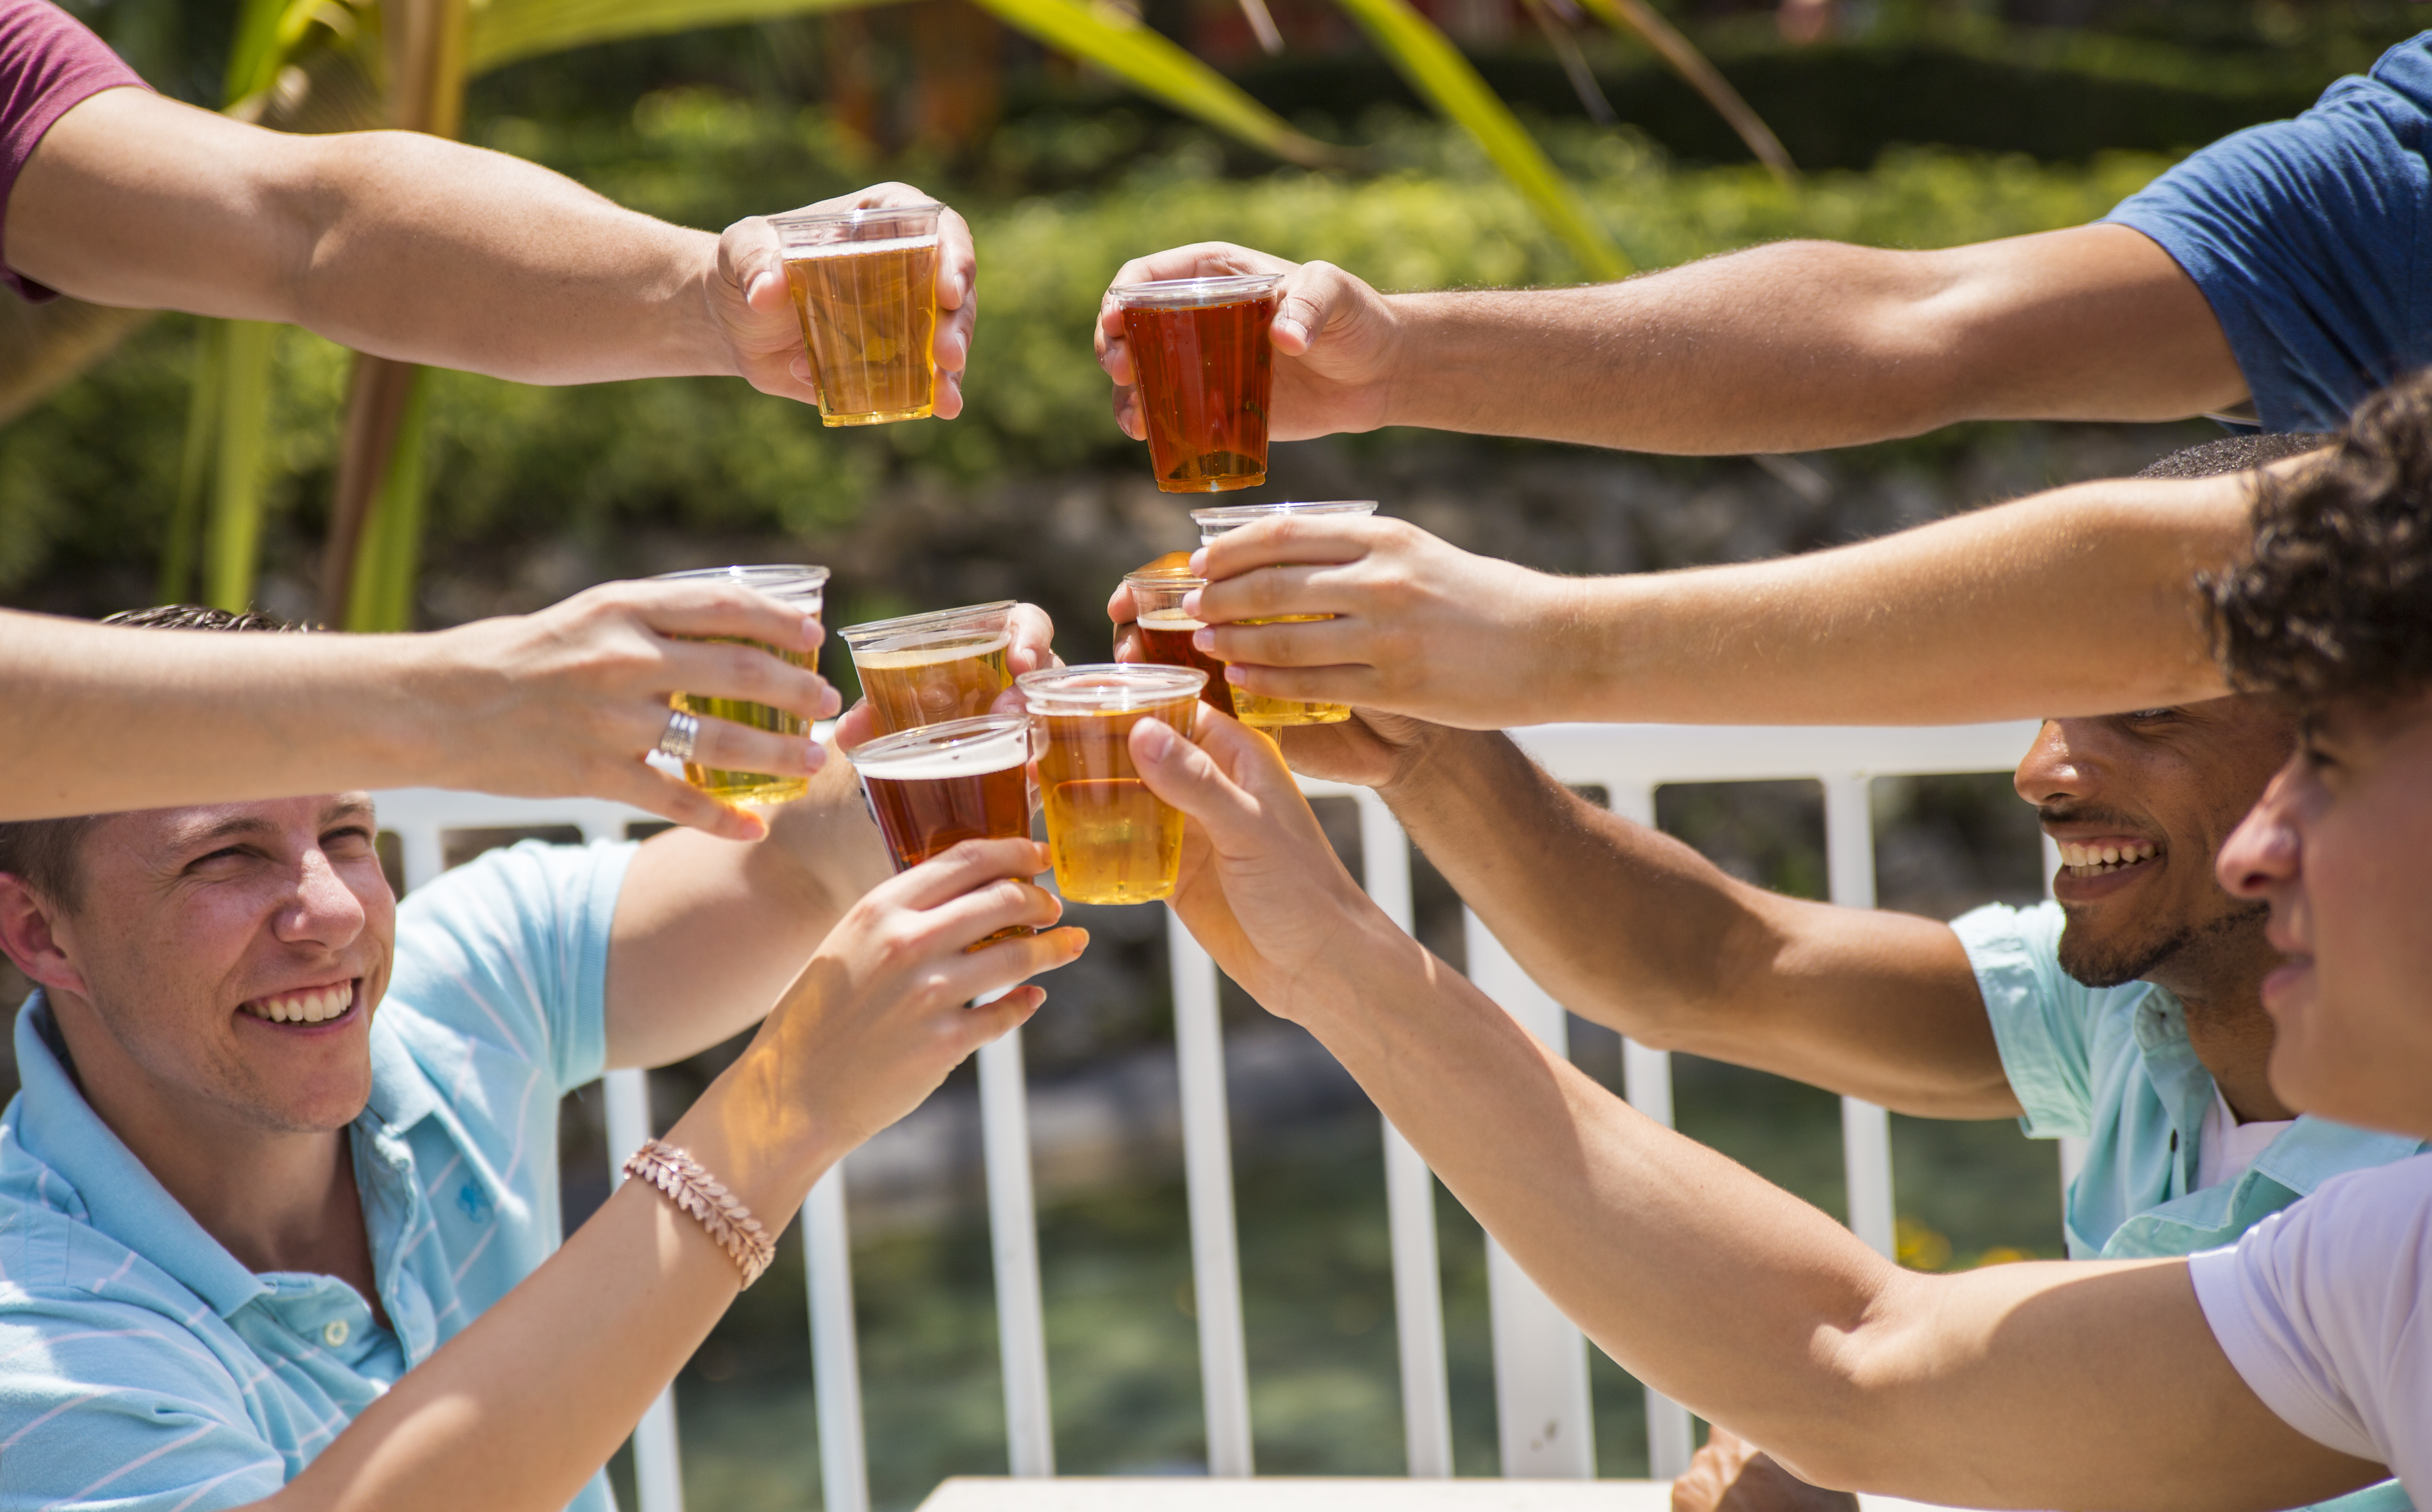 BIG NEWS ON BREWS! COMPLIMENTARY BEER EXTENDED AT BUSCH GARDENS TAMPA BAY!